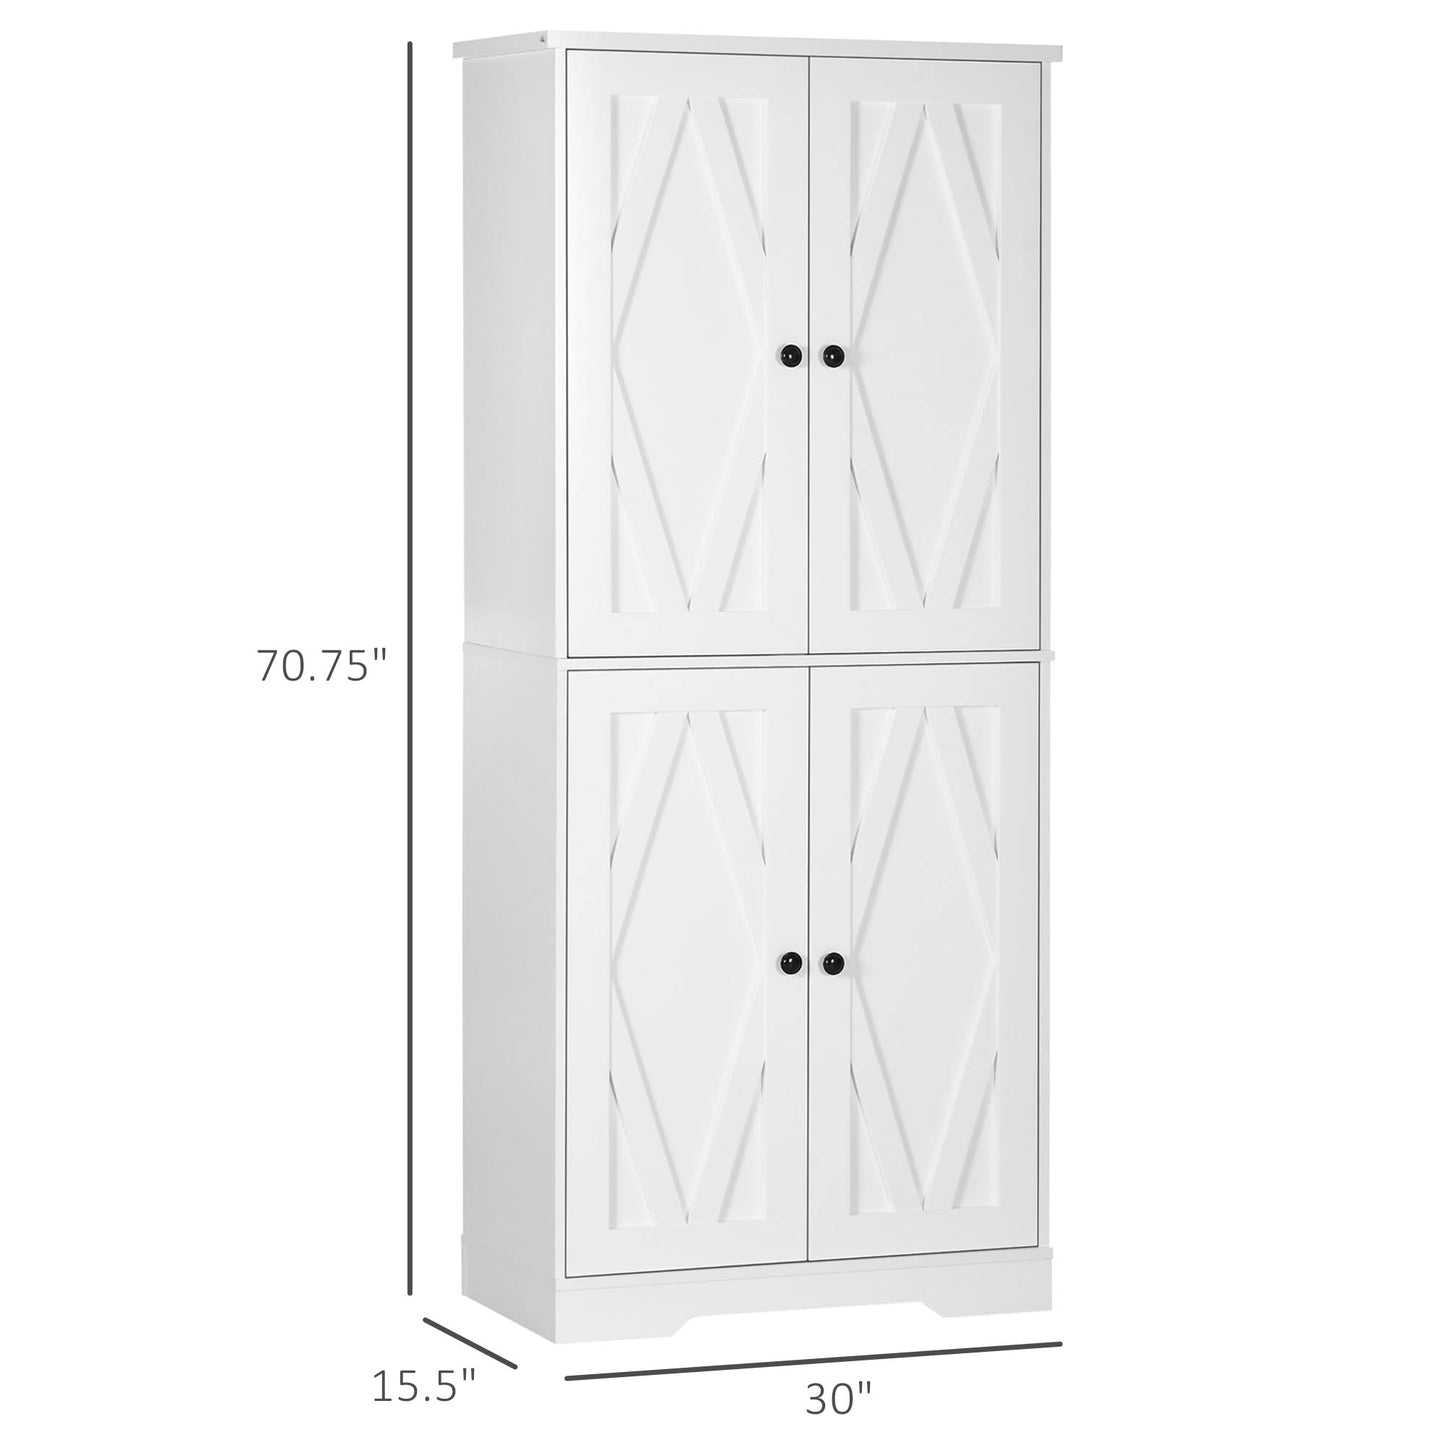 HOMCOM 70.75" Farmhouse Tall Kitchen Pantry Storage Cabinet, Freestanding Cabinets with Doors and Shelf Adjustability, 4 Door Kitchen Shelf Storage with 4 Tiers, White